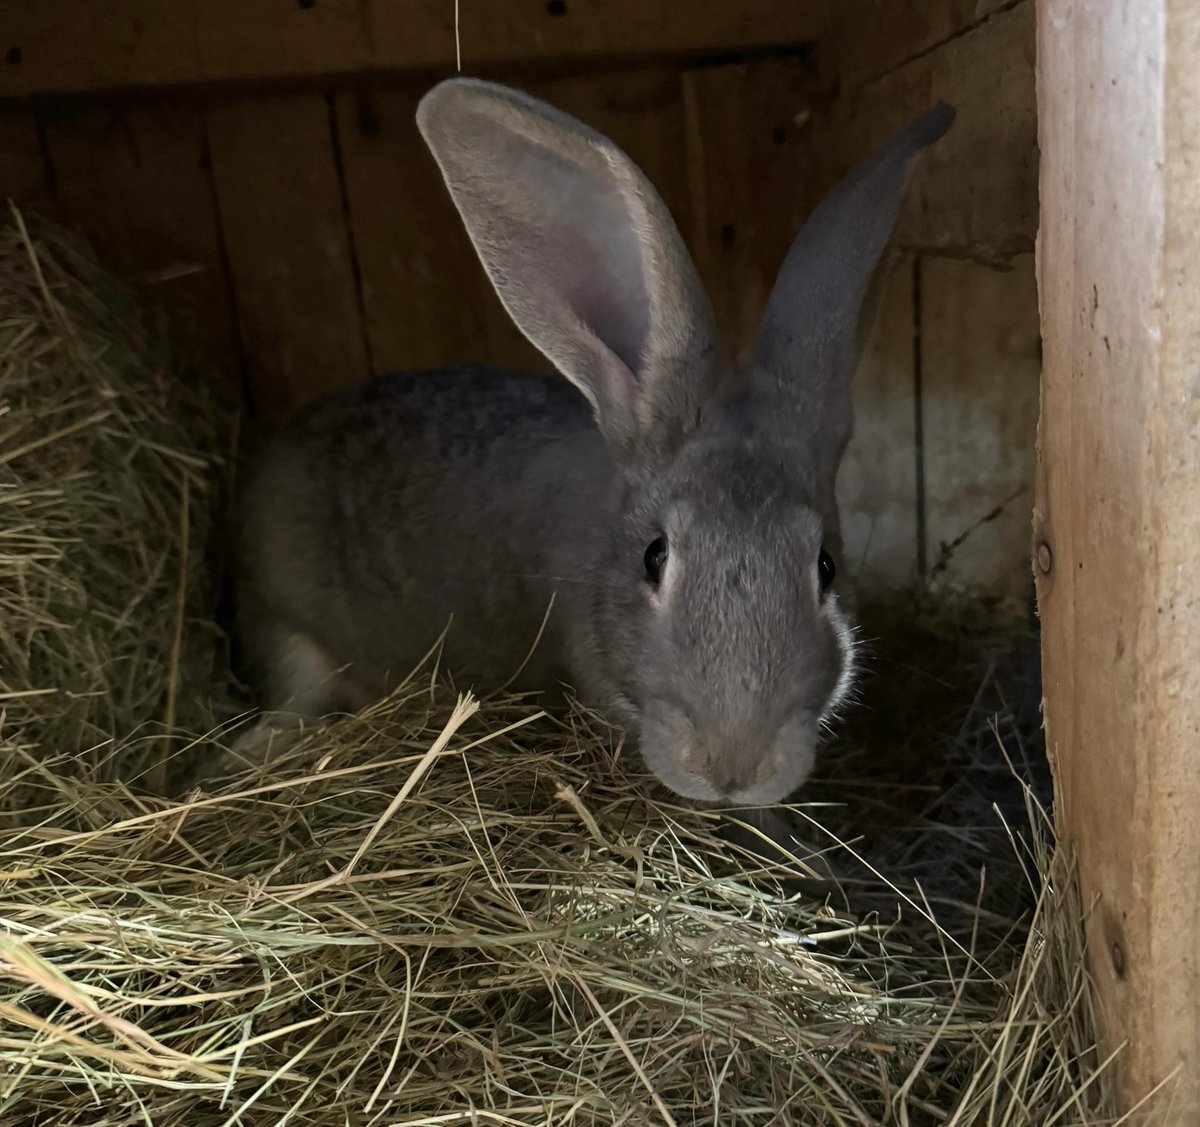 #MISSING: Have you seen Shane?

6-month-old male, large, grey Continental cross #rabbit escaped overnight from a garden on #MeridenRoad in #HamptonInArden #B92. If there are ANY sightings of him, let #SU know. Please REPOST.